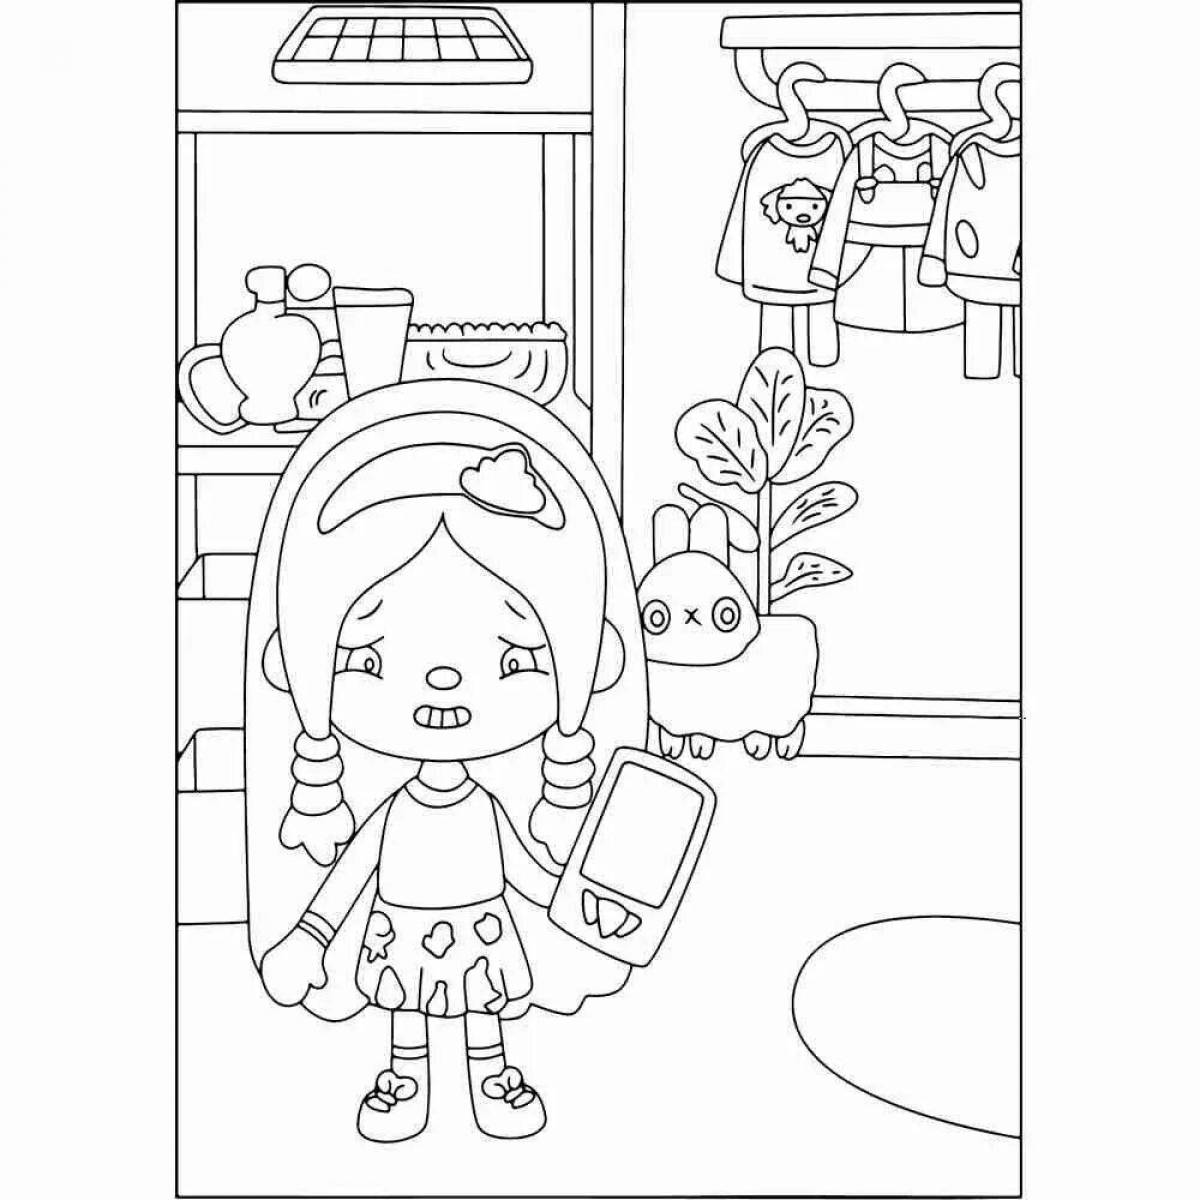 Colorful toka side furniture coloring page